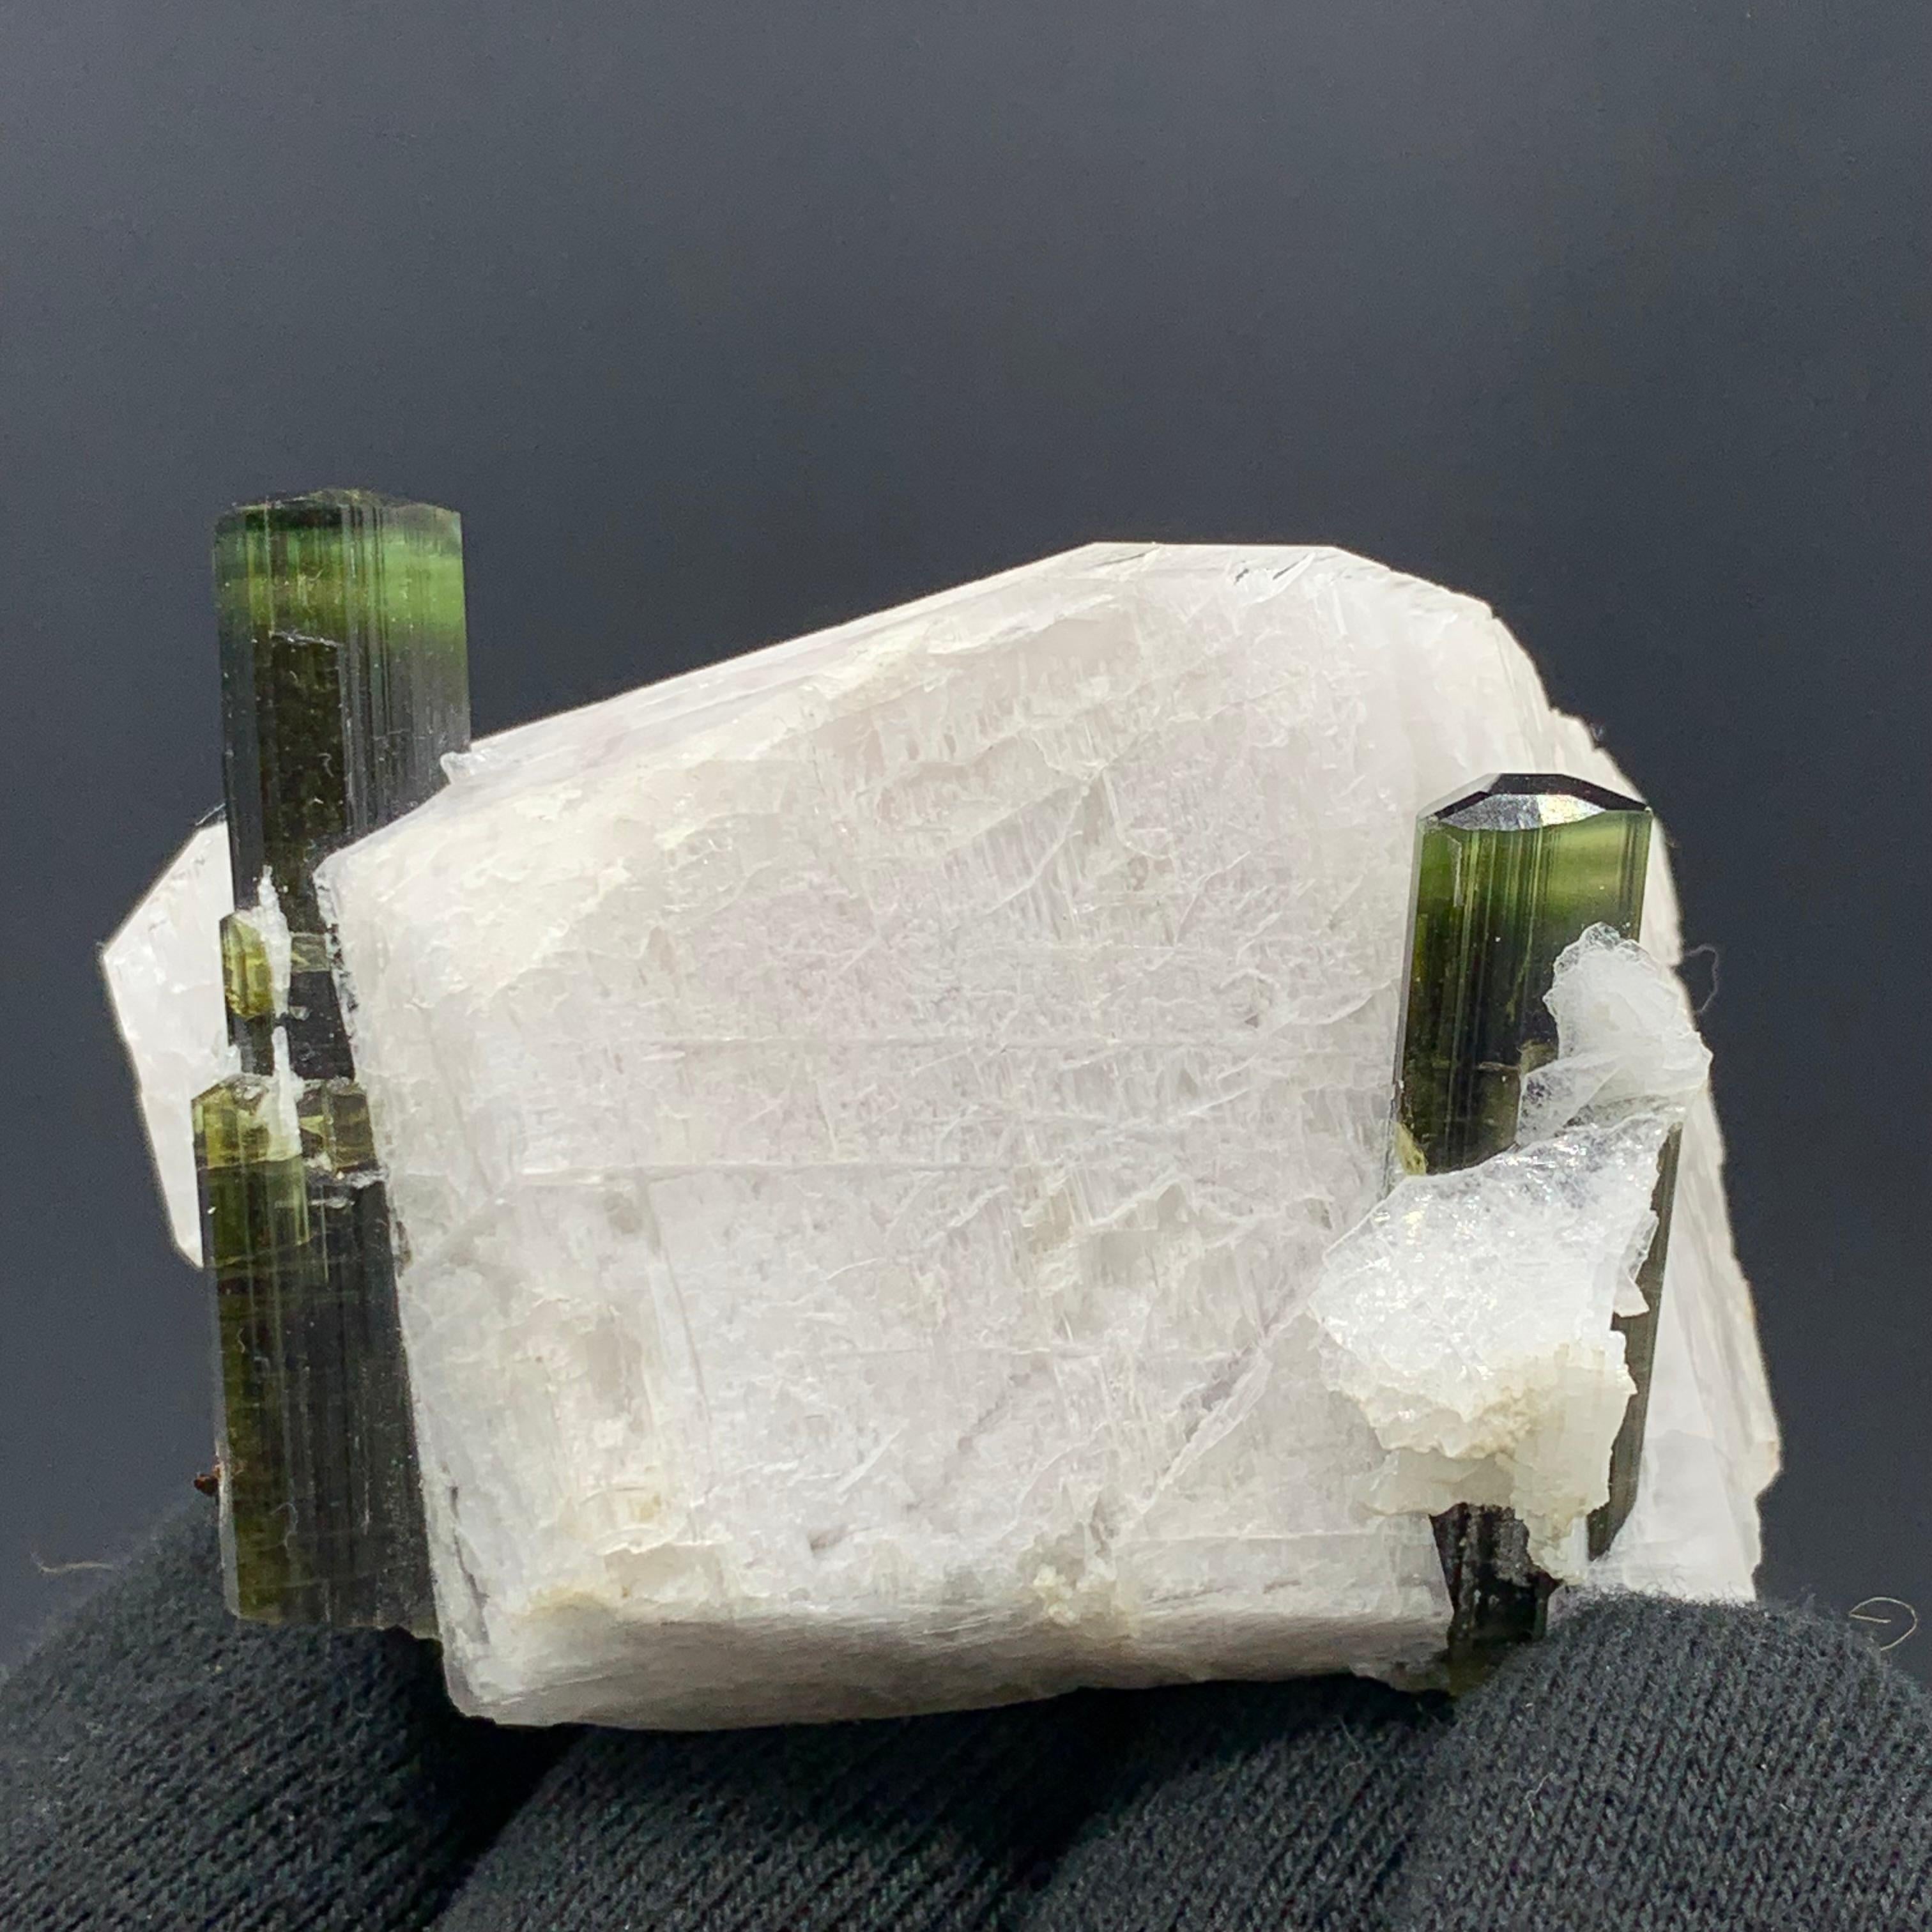 121.32 Gram Pretty Dual Tourmaline Specimen Attached With Feldspar From Pakistan

Weight: 121.32 Gram
Dimension: 4.7 x 4.4 x 3.9 Cm 
Origin: Stak Nala Valley, Pakistan 

Tourmaline is a crystalline silicate mineral group in which boron is compounded